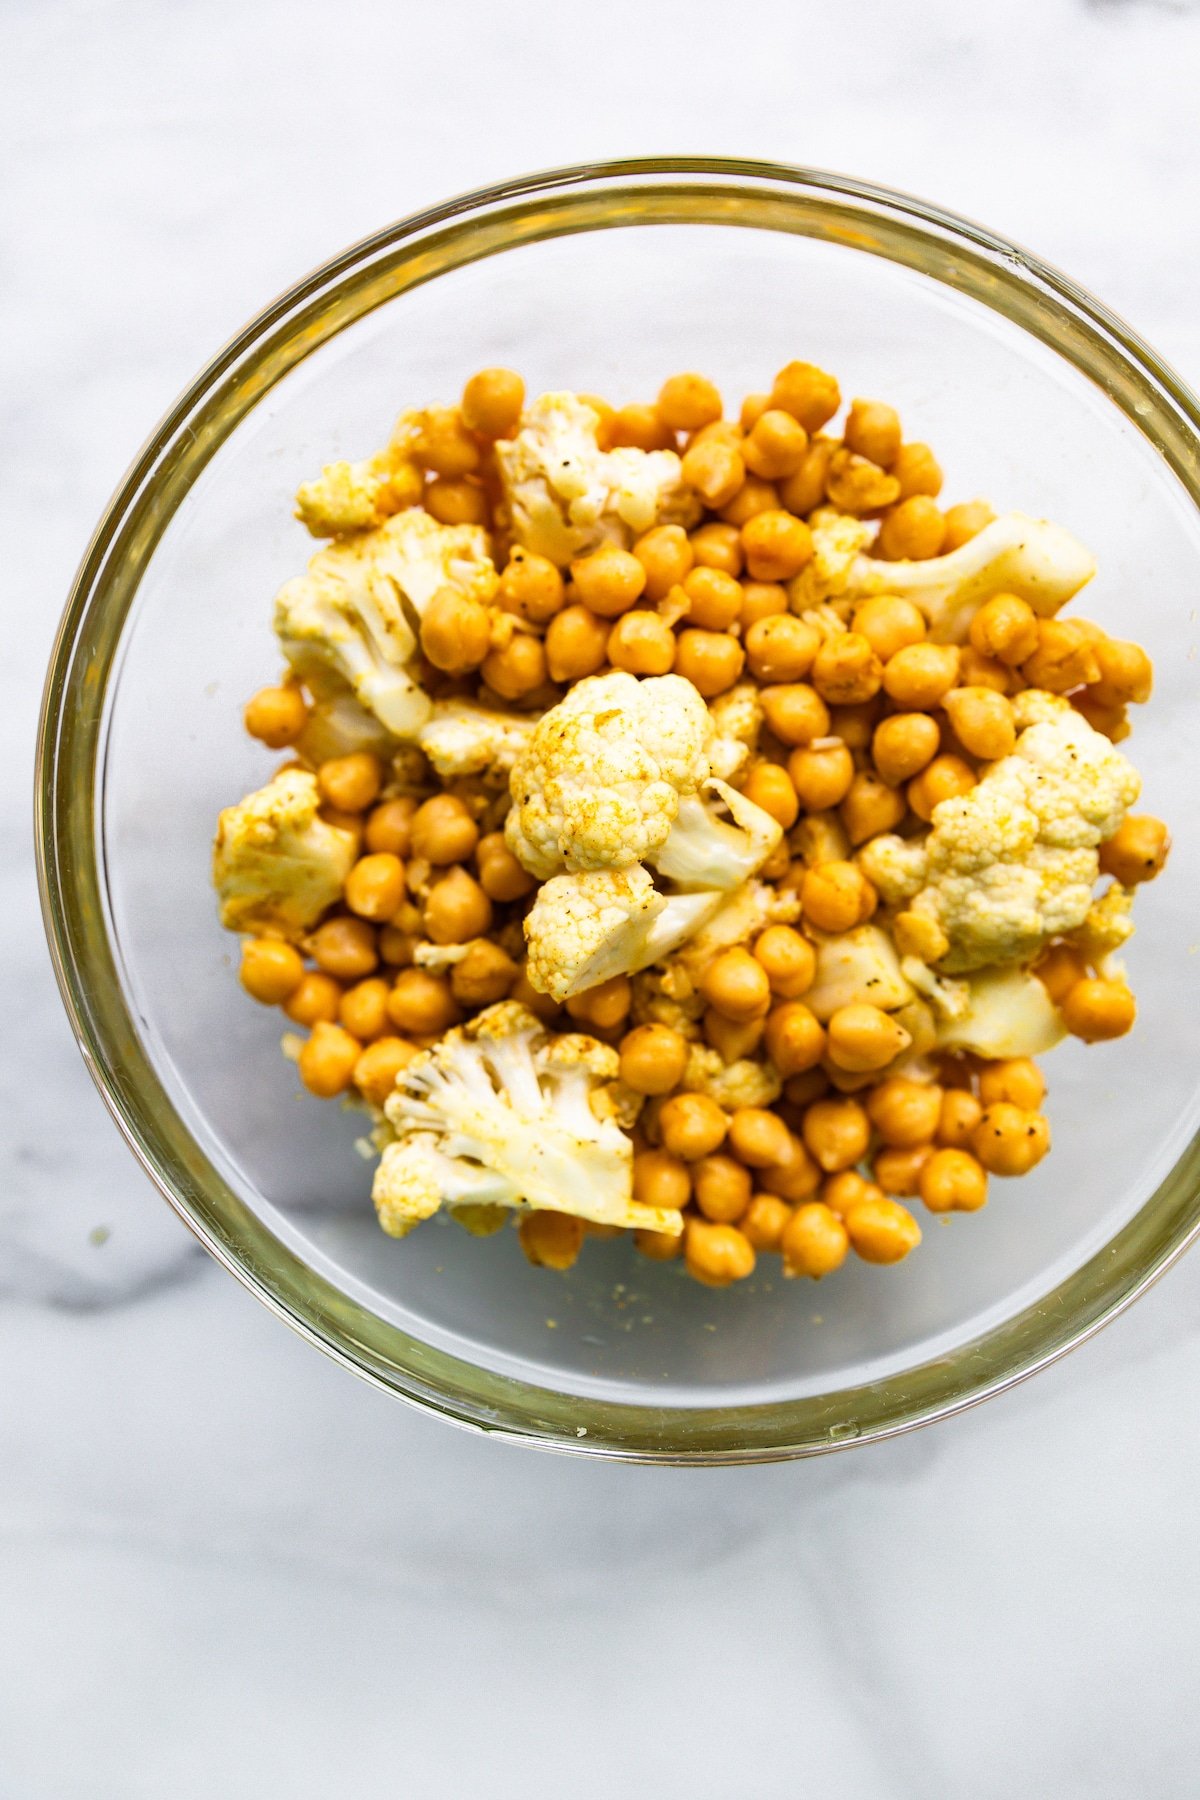 Cauliflower and chickpeas coated in curry seasoning in a clear glass mixing bowl.